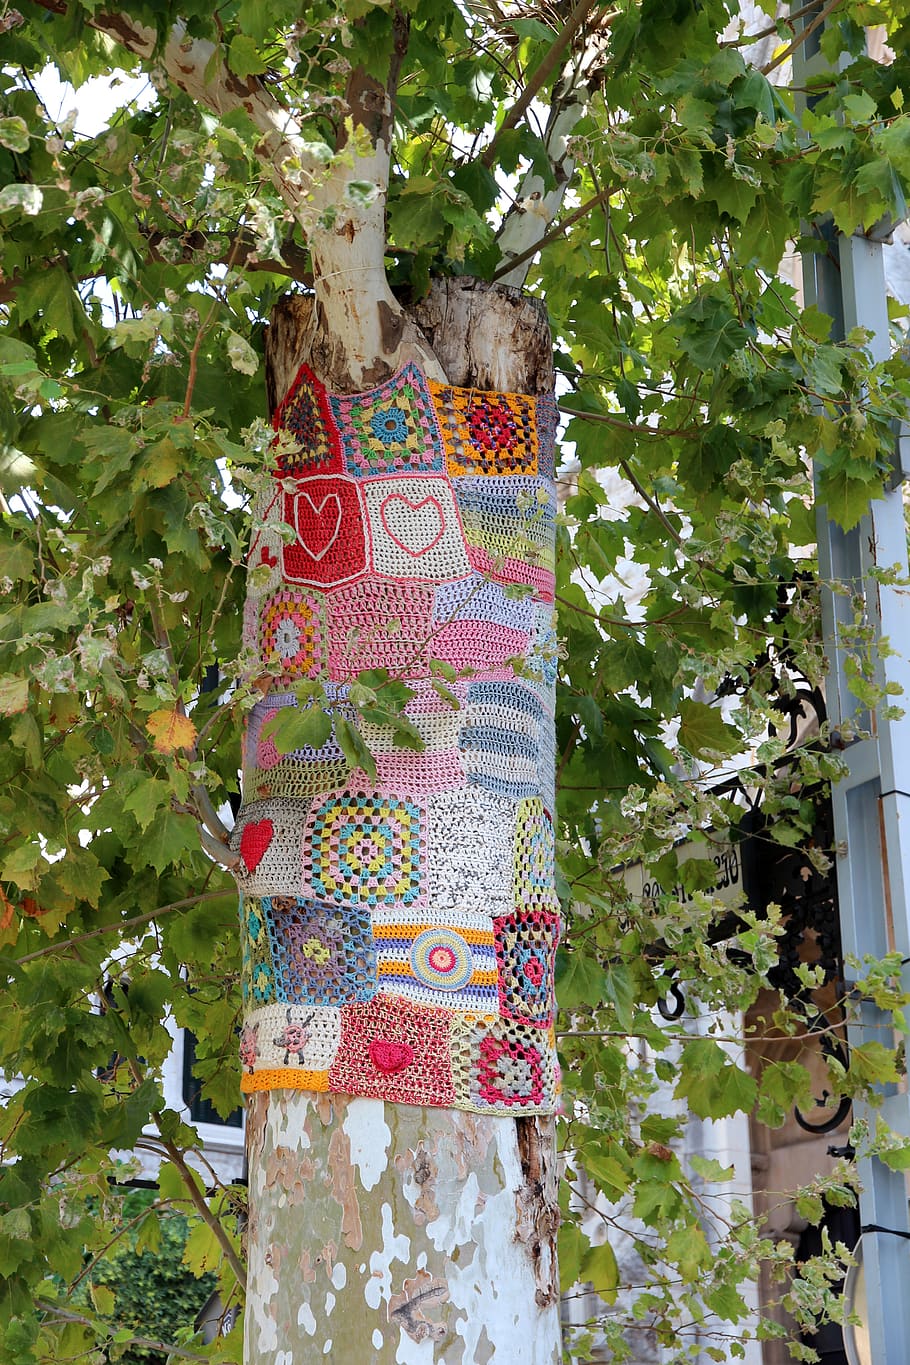 tree, knit, crochet, embroidered, colorful, street art, nature, tree decoration, knitting, craft